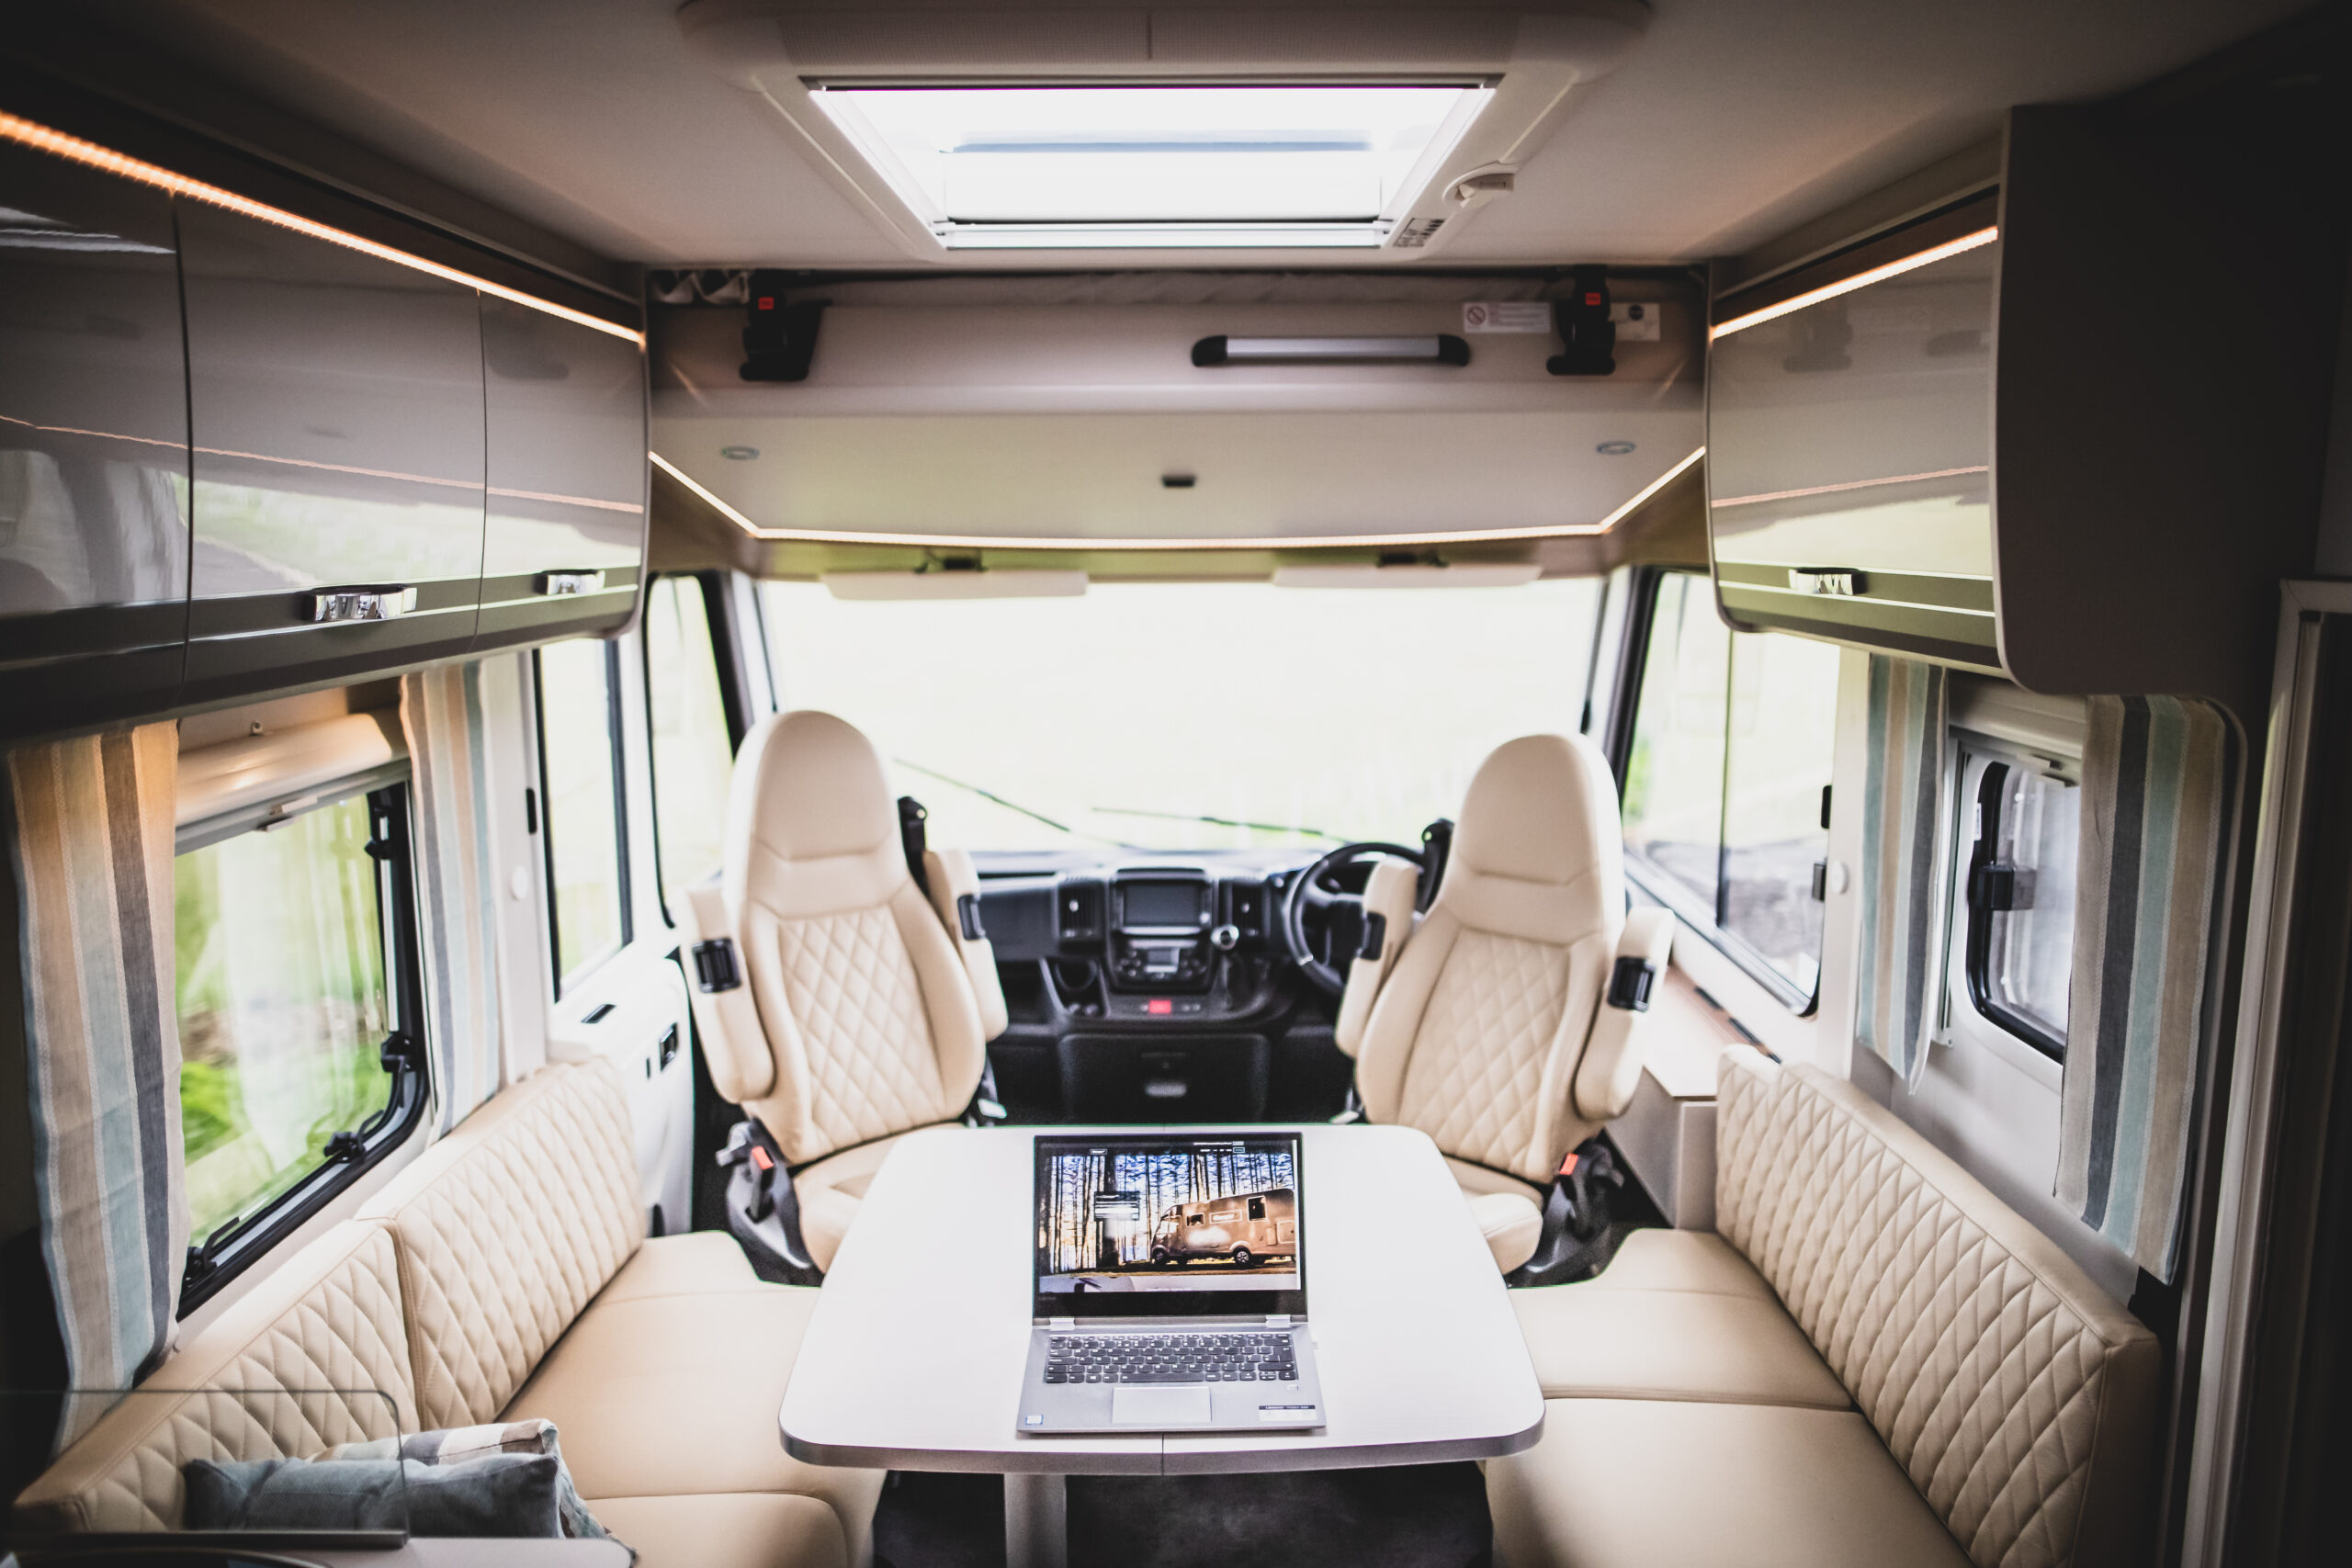 Van life: GlamperRV is a luxury mobile office for working from anywhere